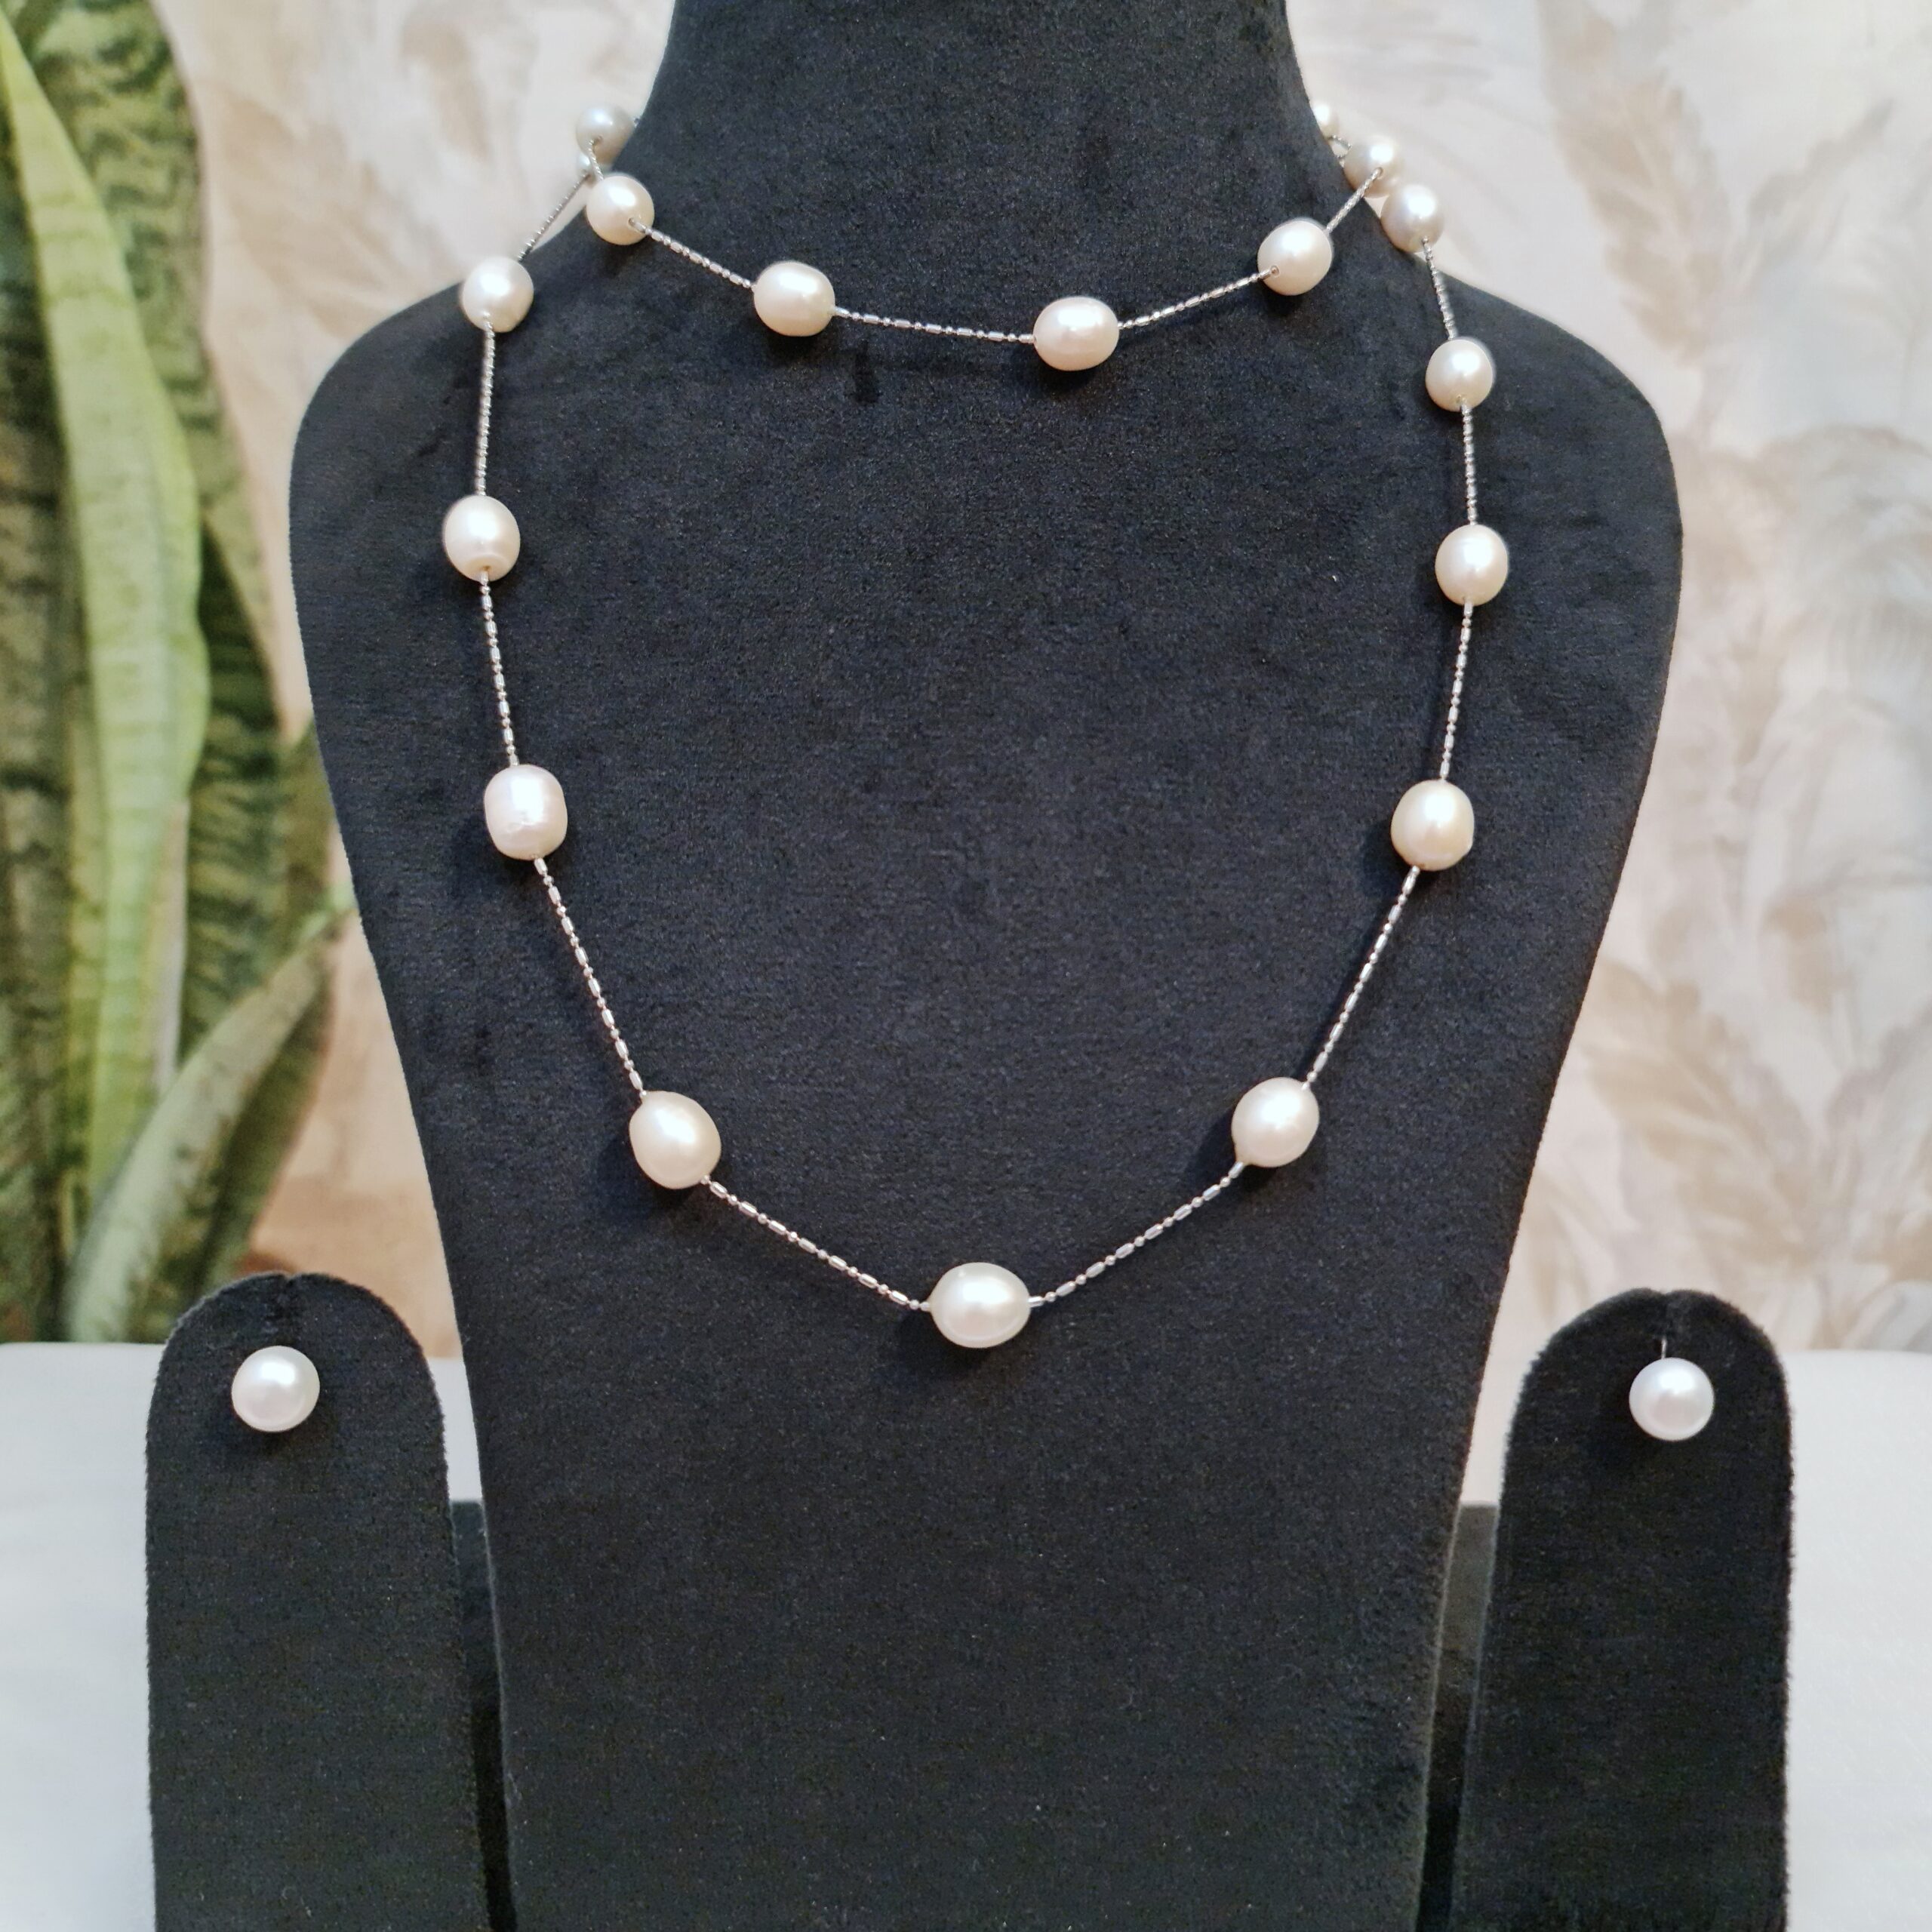 38Inch Long Lovely 9-10mm Oval Offwhite Pearls With Silver Finish Chain